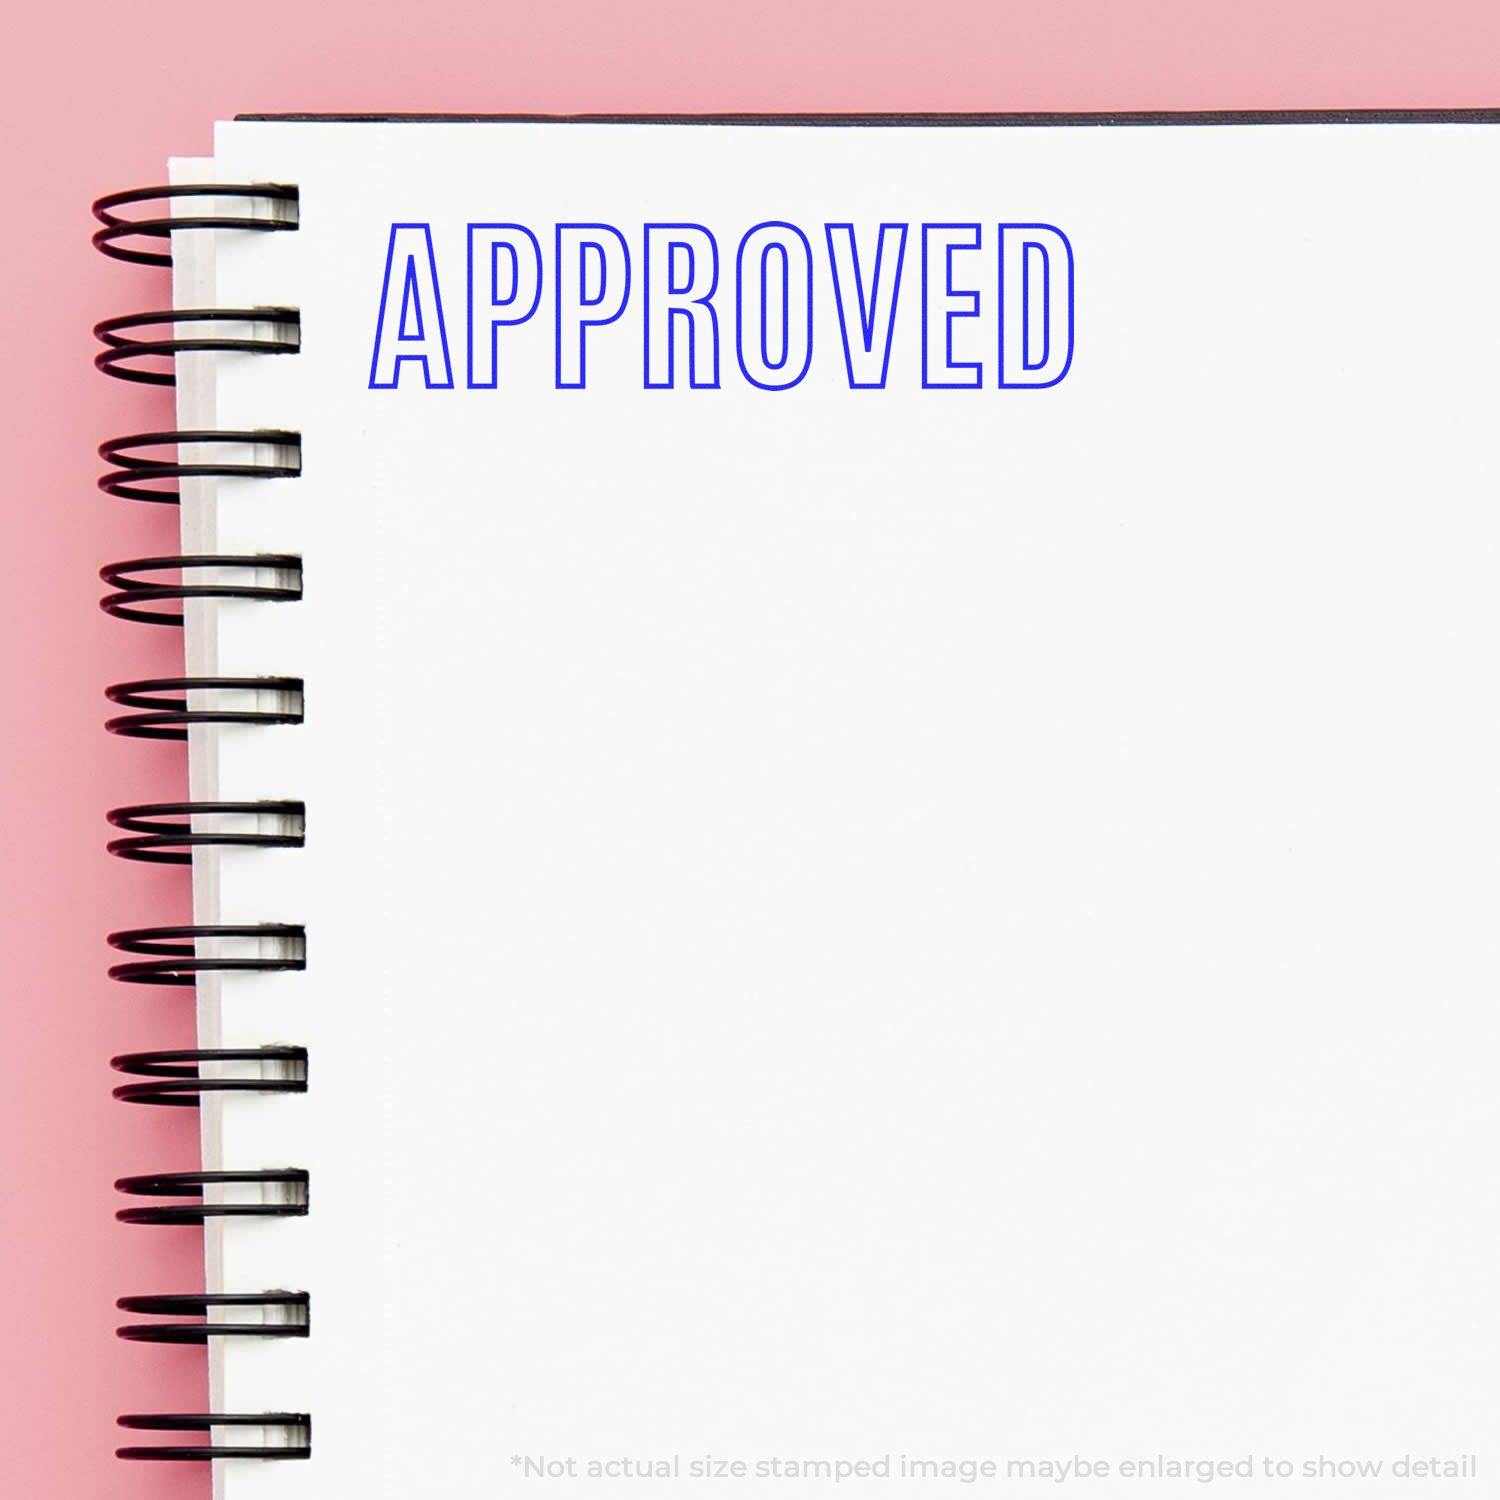 A stock office rubber stamp with a stamped image showing how the text "APPROVED" in an outline font is displayed after stamping.